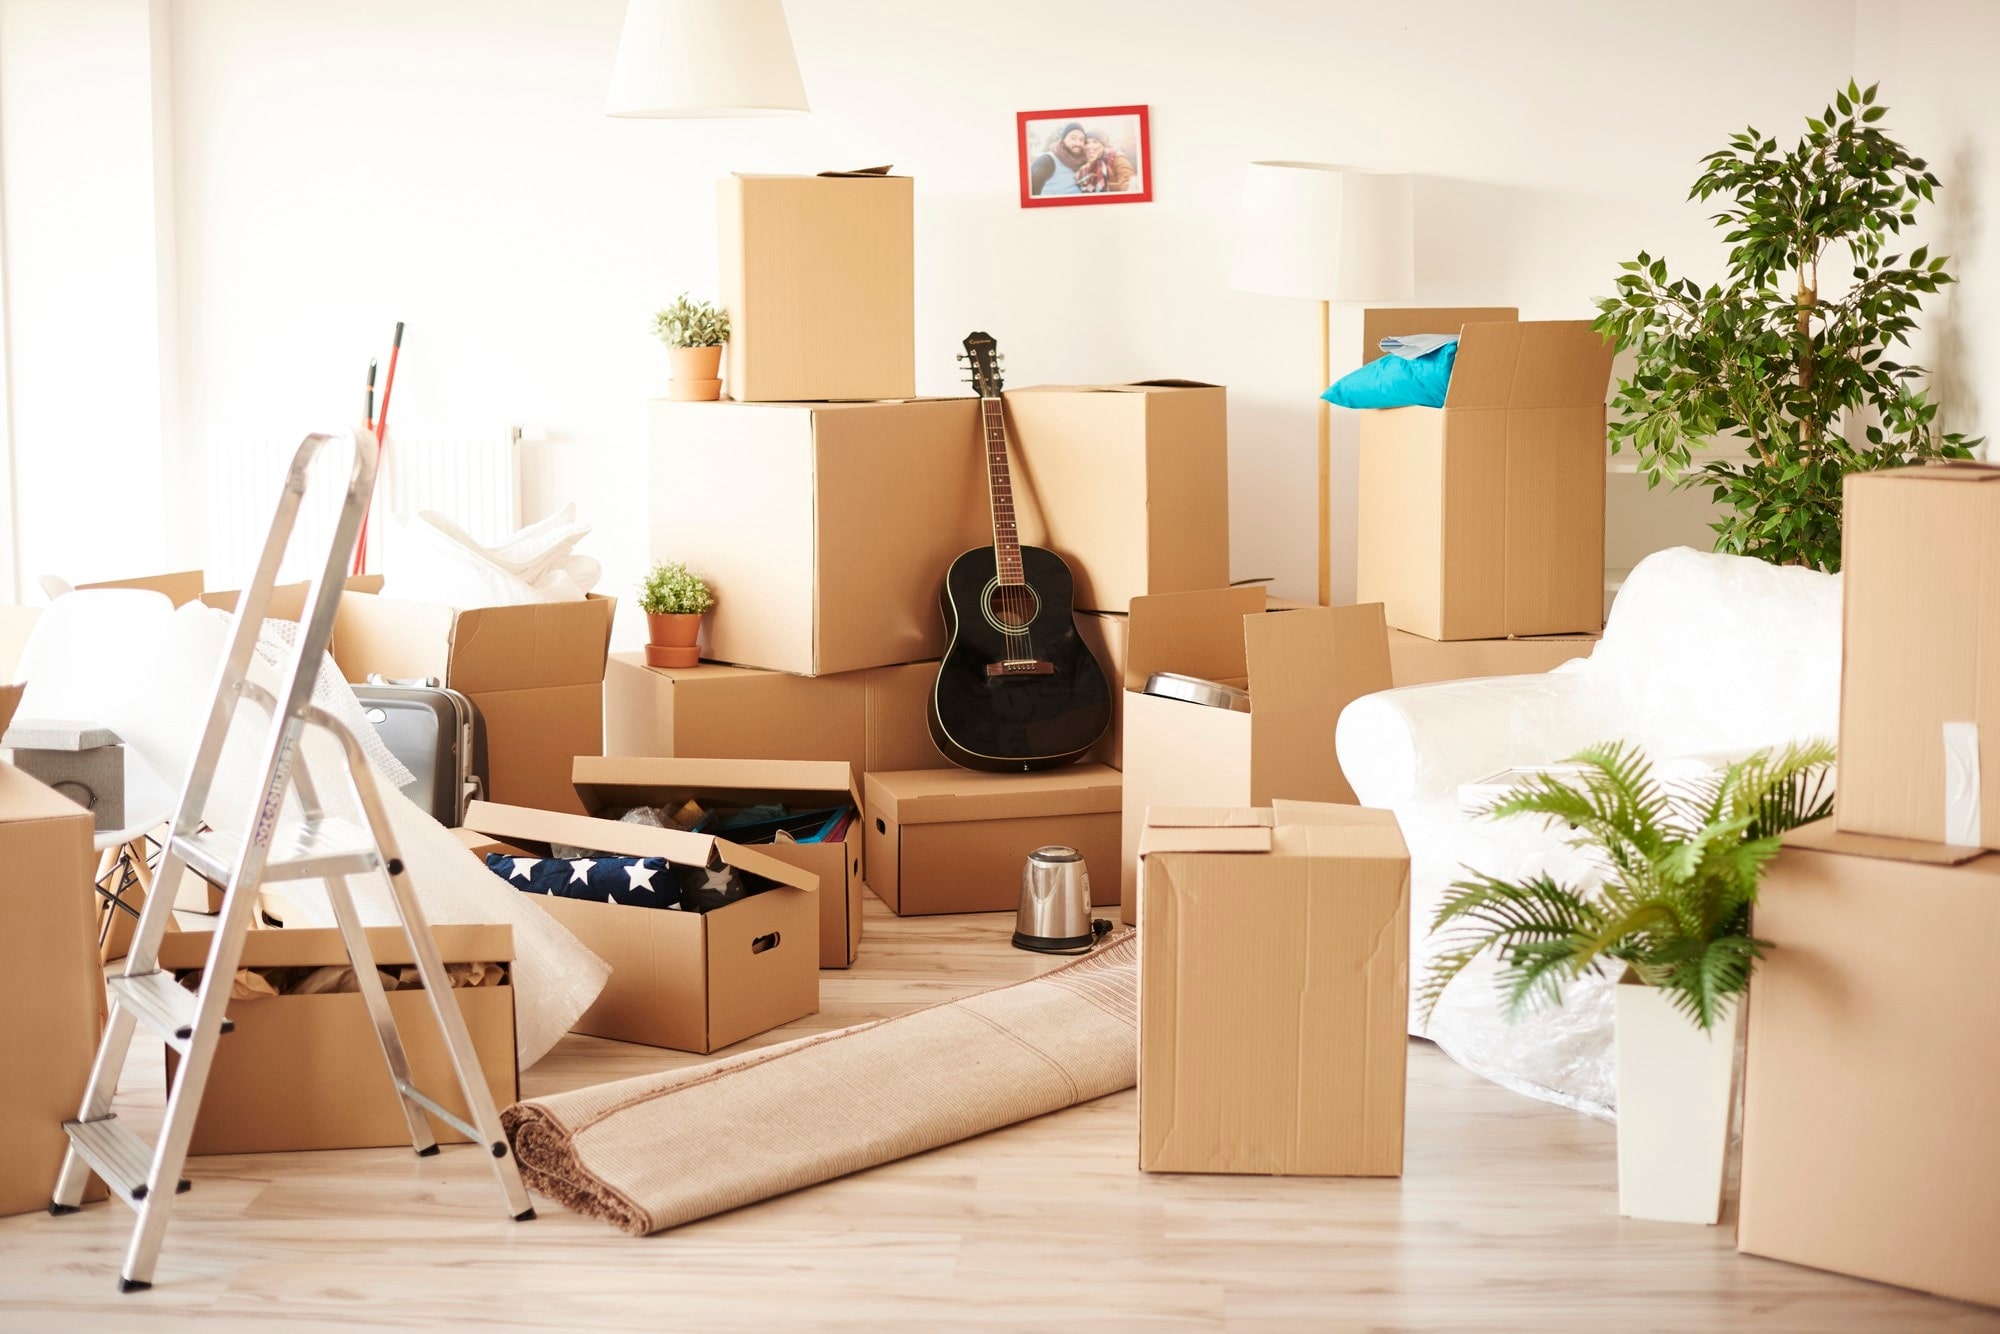 organizing, packing, selling, donating are all part of downsizing and a senior professional move manager can help.